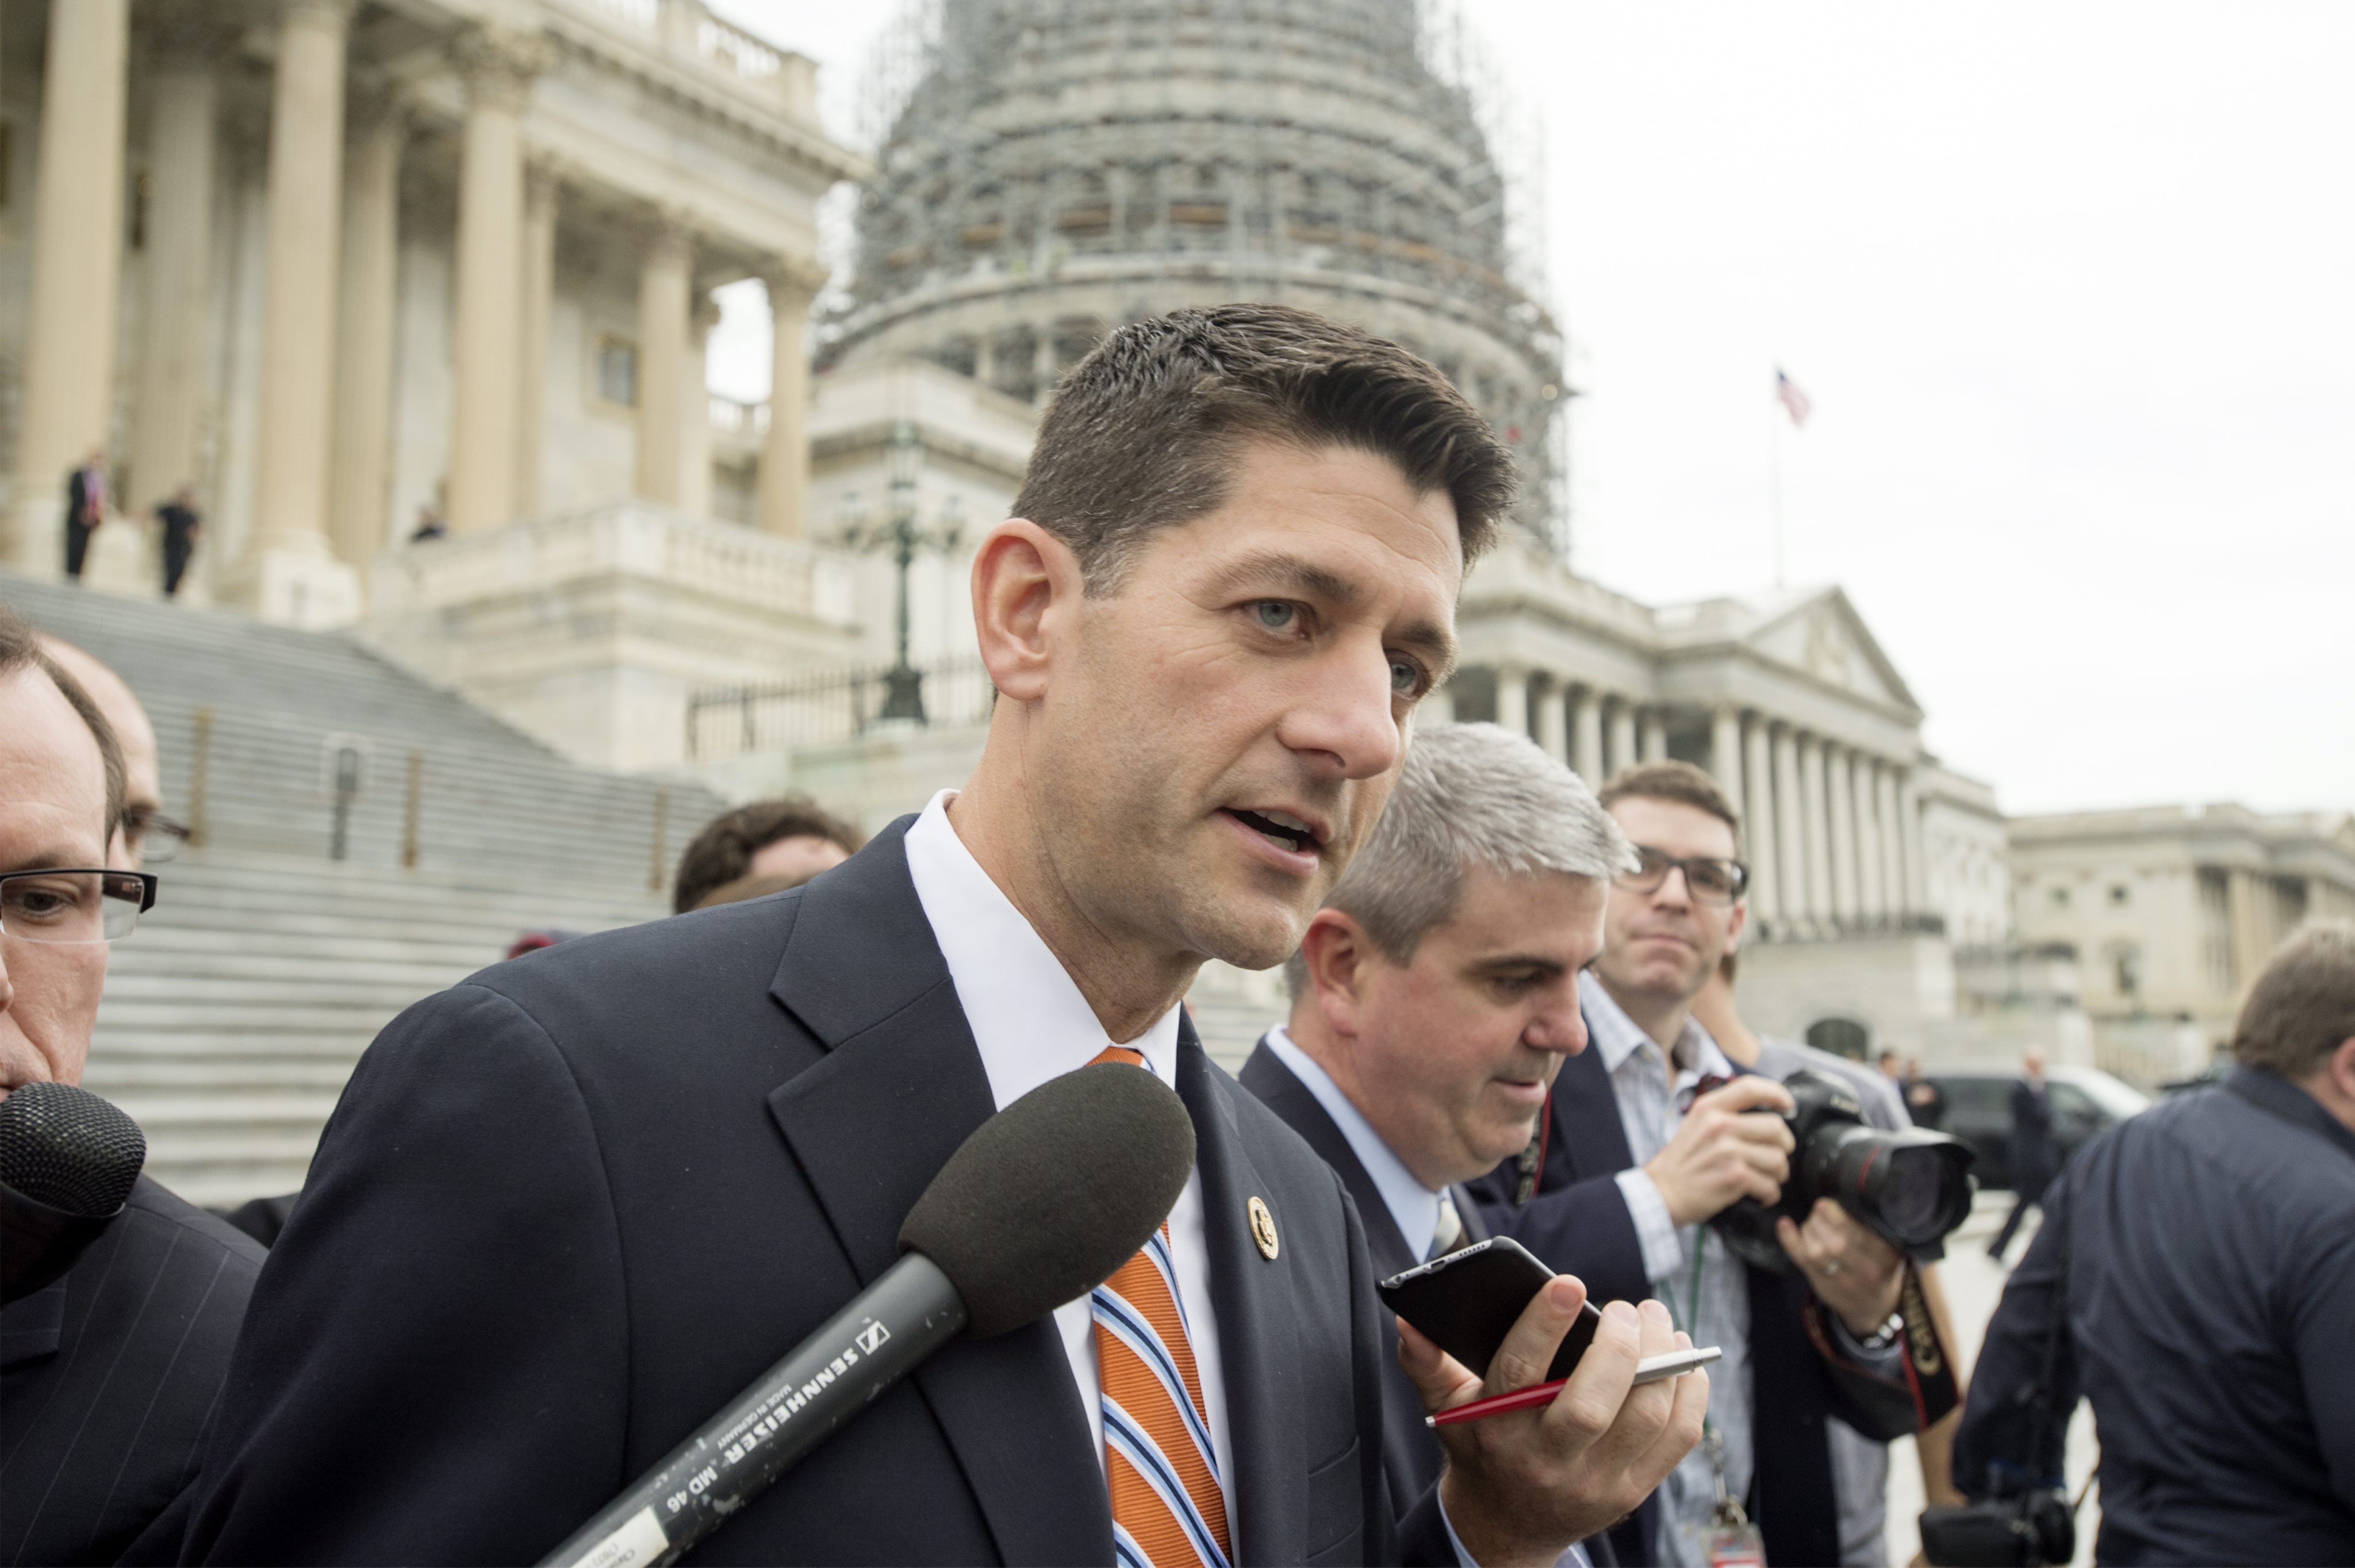 epaselect epa04970845 Representative from Wisconsin Paul Ryan leaves the Capitol Building following a vote, in Washington, DC, USA, 09 October 2015. Ryan has been asked by colleagues to consider running to become the next US Speaker of the House. EPA/MICHAEL REYNOLDS